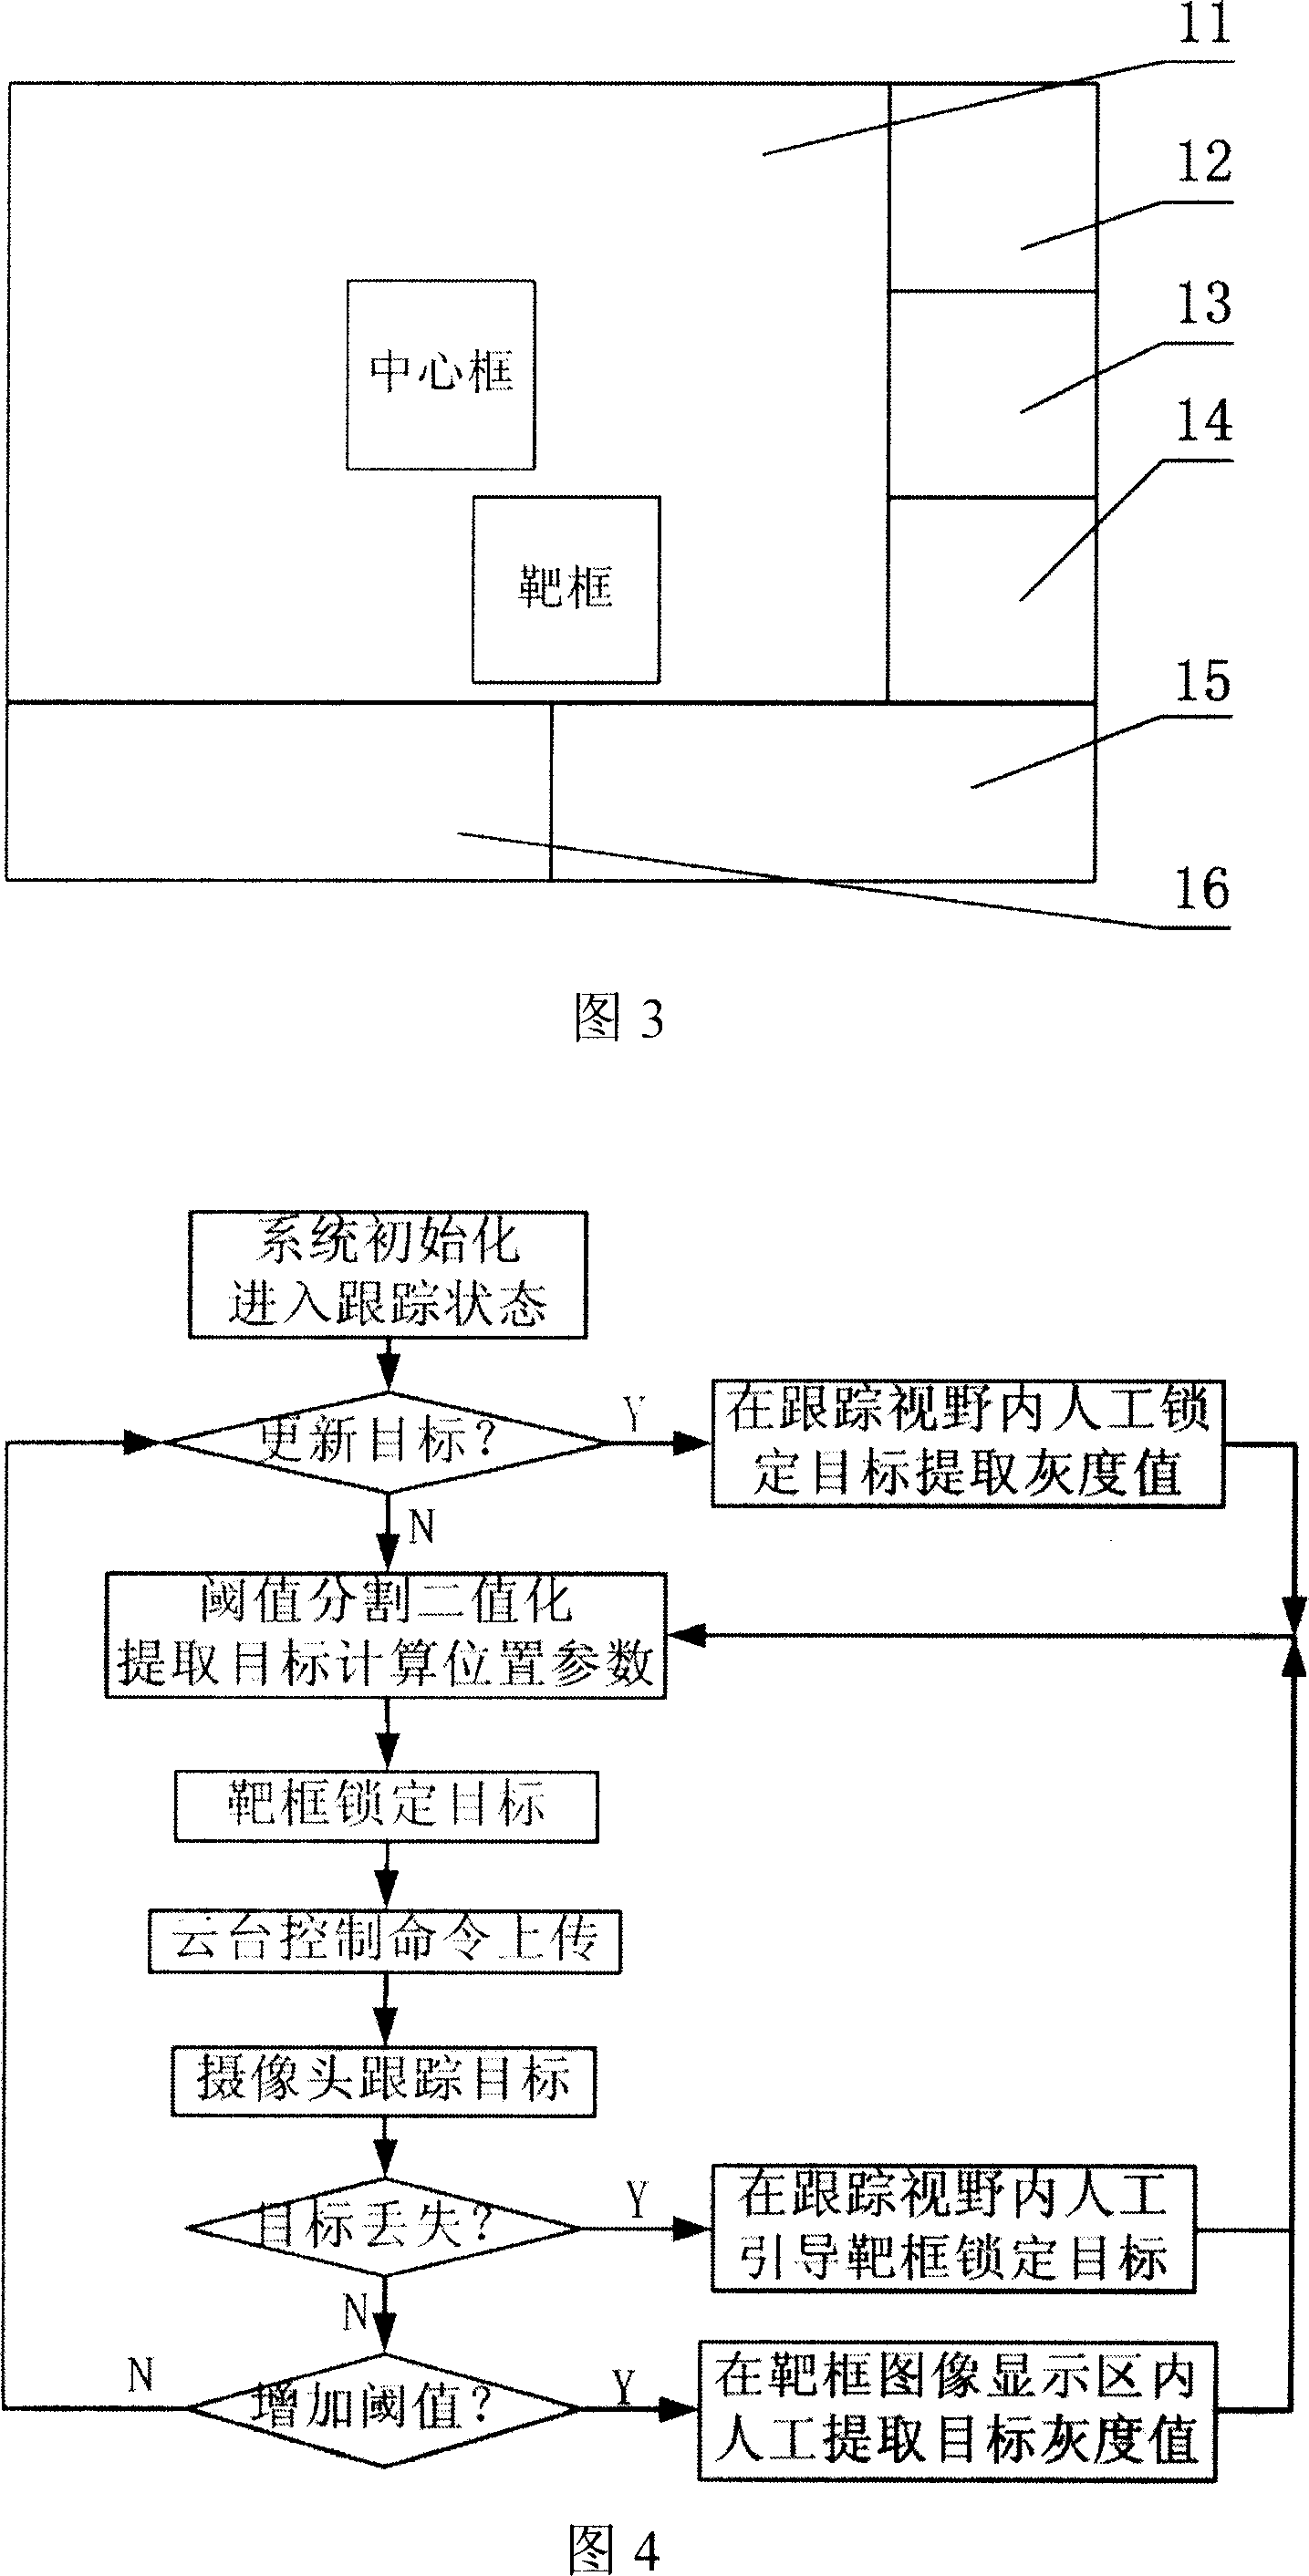 A low-altitude follow-up system and method aiming at the mobile ground object by unmanned aircraft